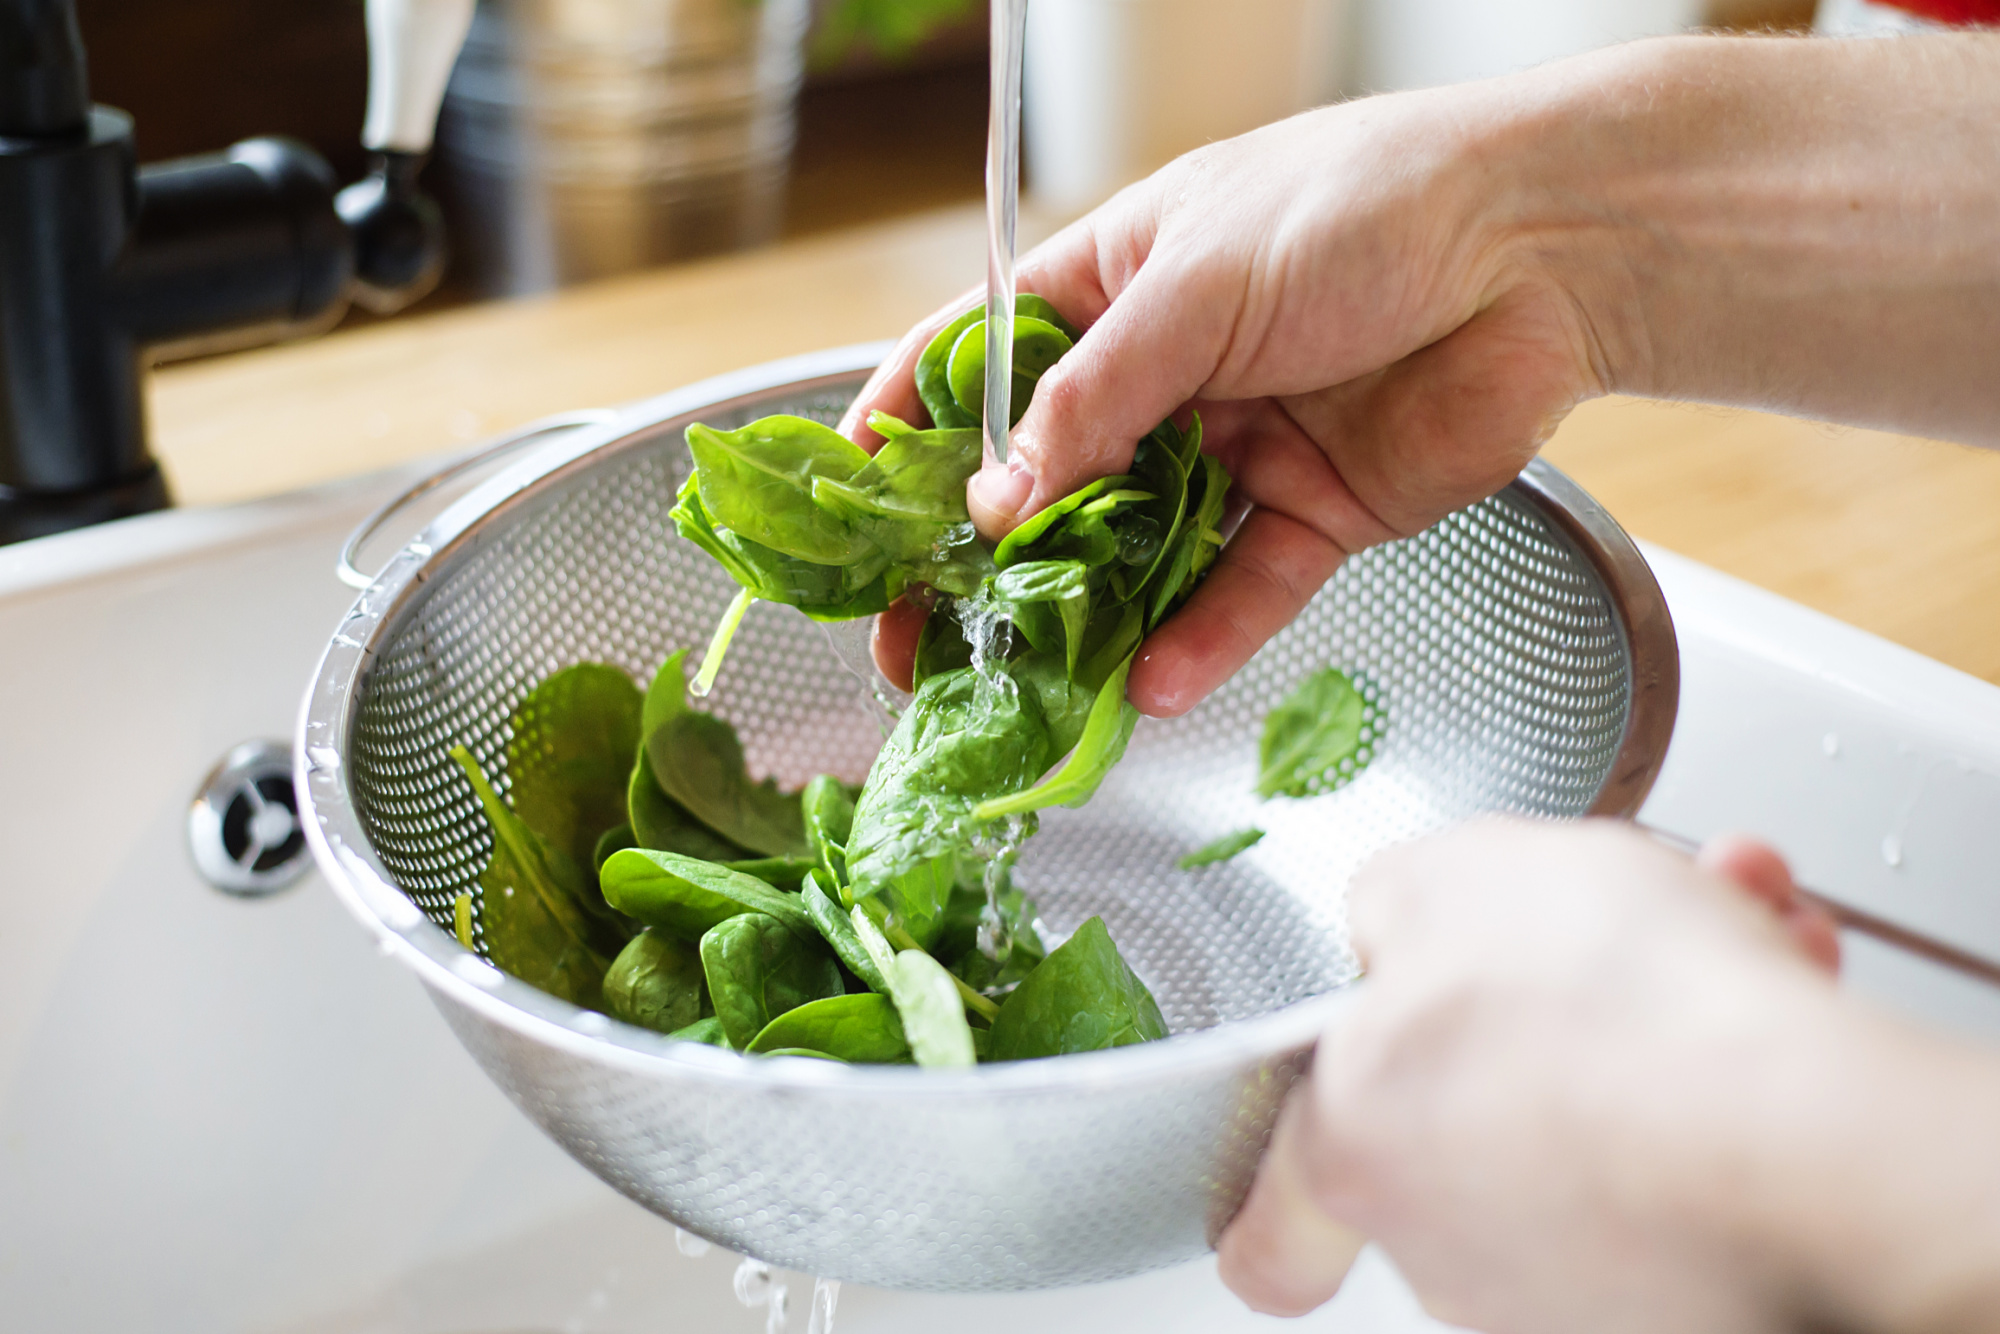 A person is rinsing organic spinach in a colander using vegetable wash.